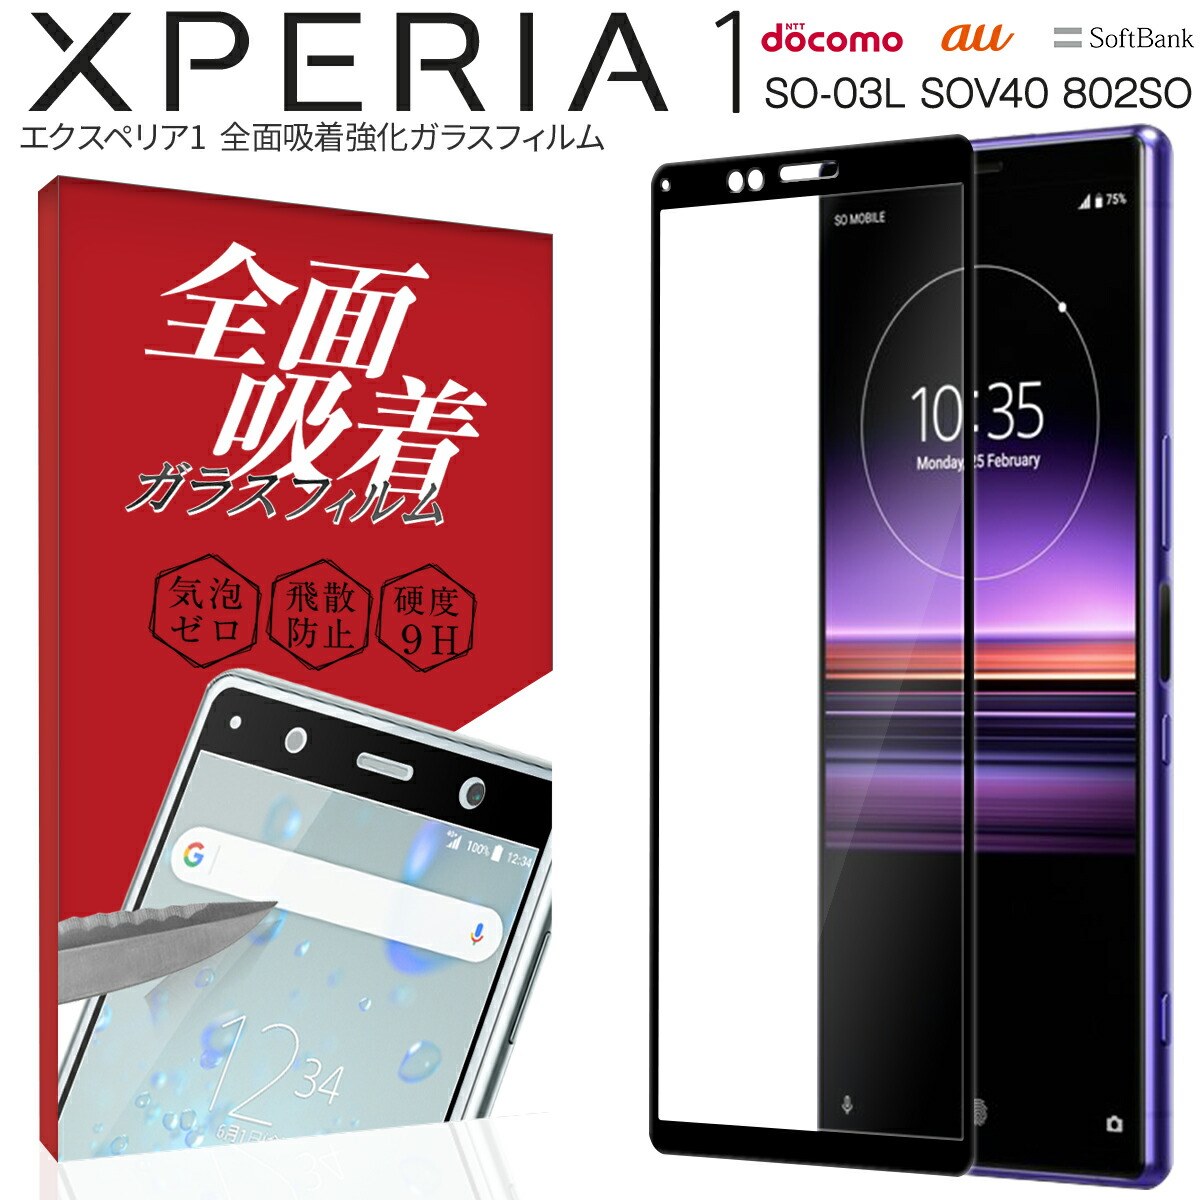 Sony Xperia1 ガラスフィルム Sony Xperia 1 フィルム SO-03L SOV40 強化ガラス 保護フィルム 日本旭硝  IWNOOmK2zt, スマホ、タブレット、パソコン - centralcampo.com.br